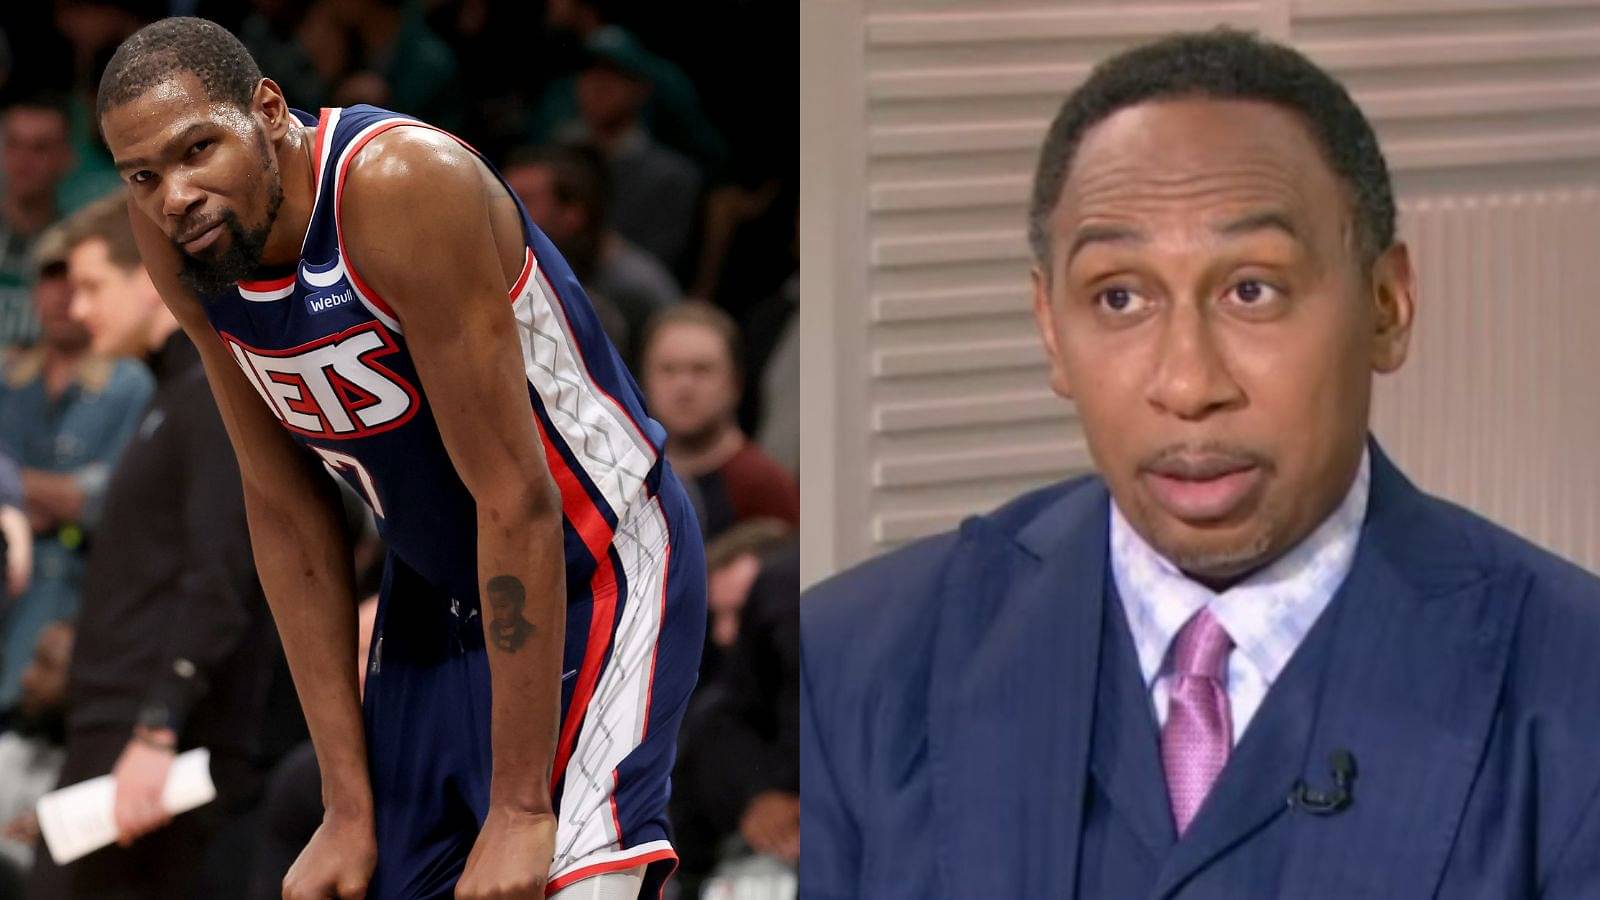 “Stephen A Smith can’t beat up on Max Kellerman ‘the boxing guy’ and that new baseball guy”: Kevin Durant is enjoying CJ McCollum and JJ Redick destroying ESPN veteran in his own backyard